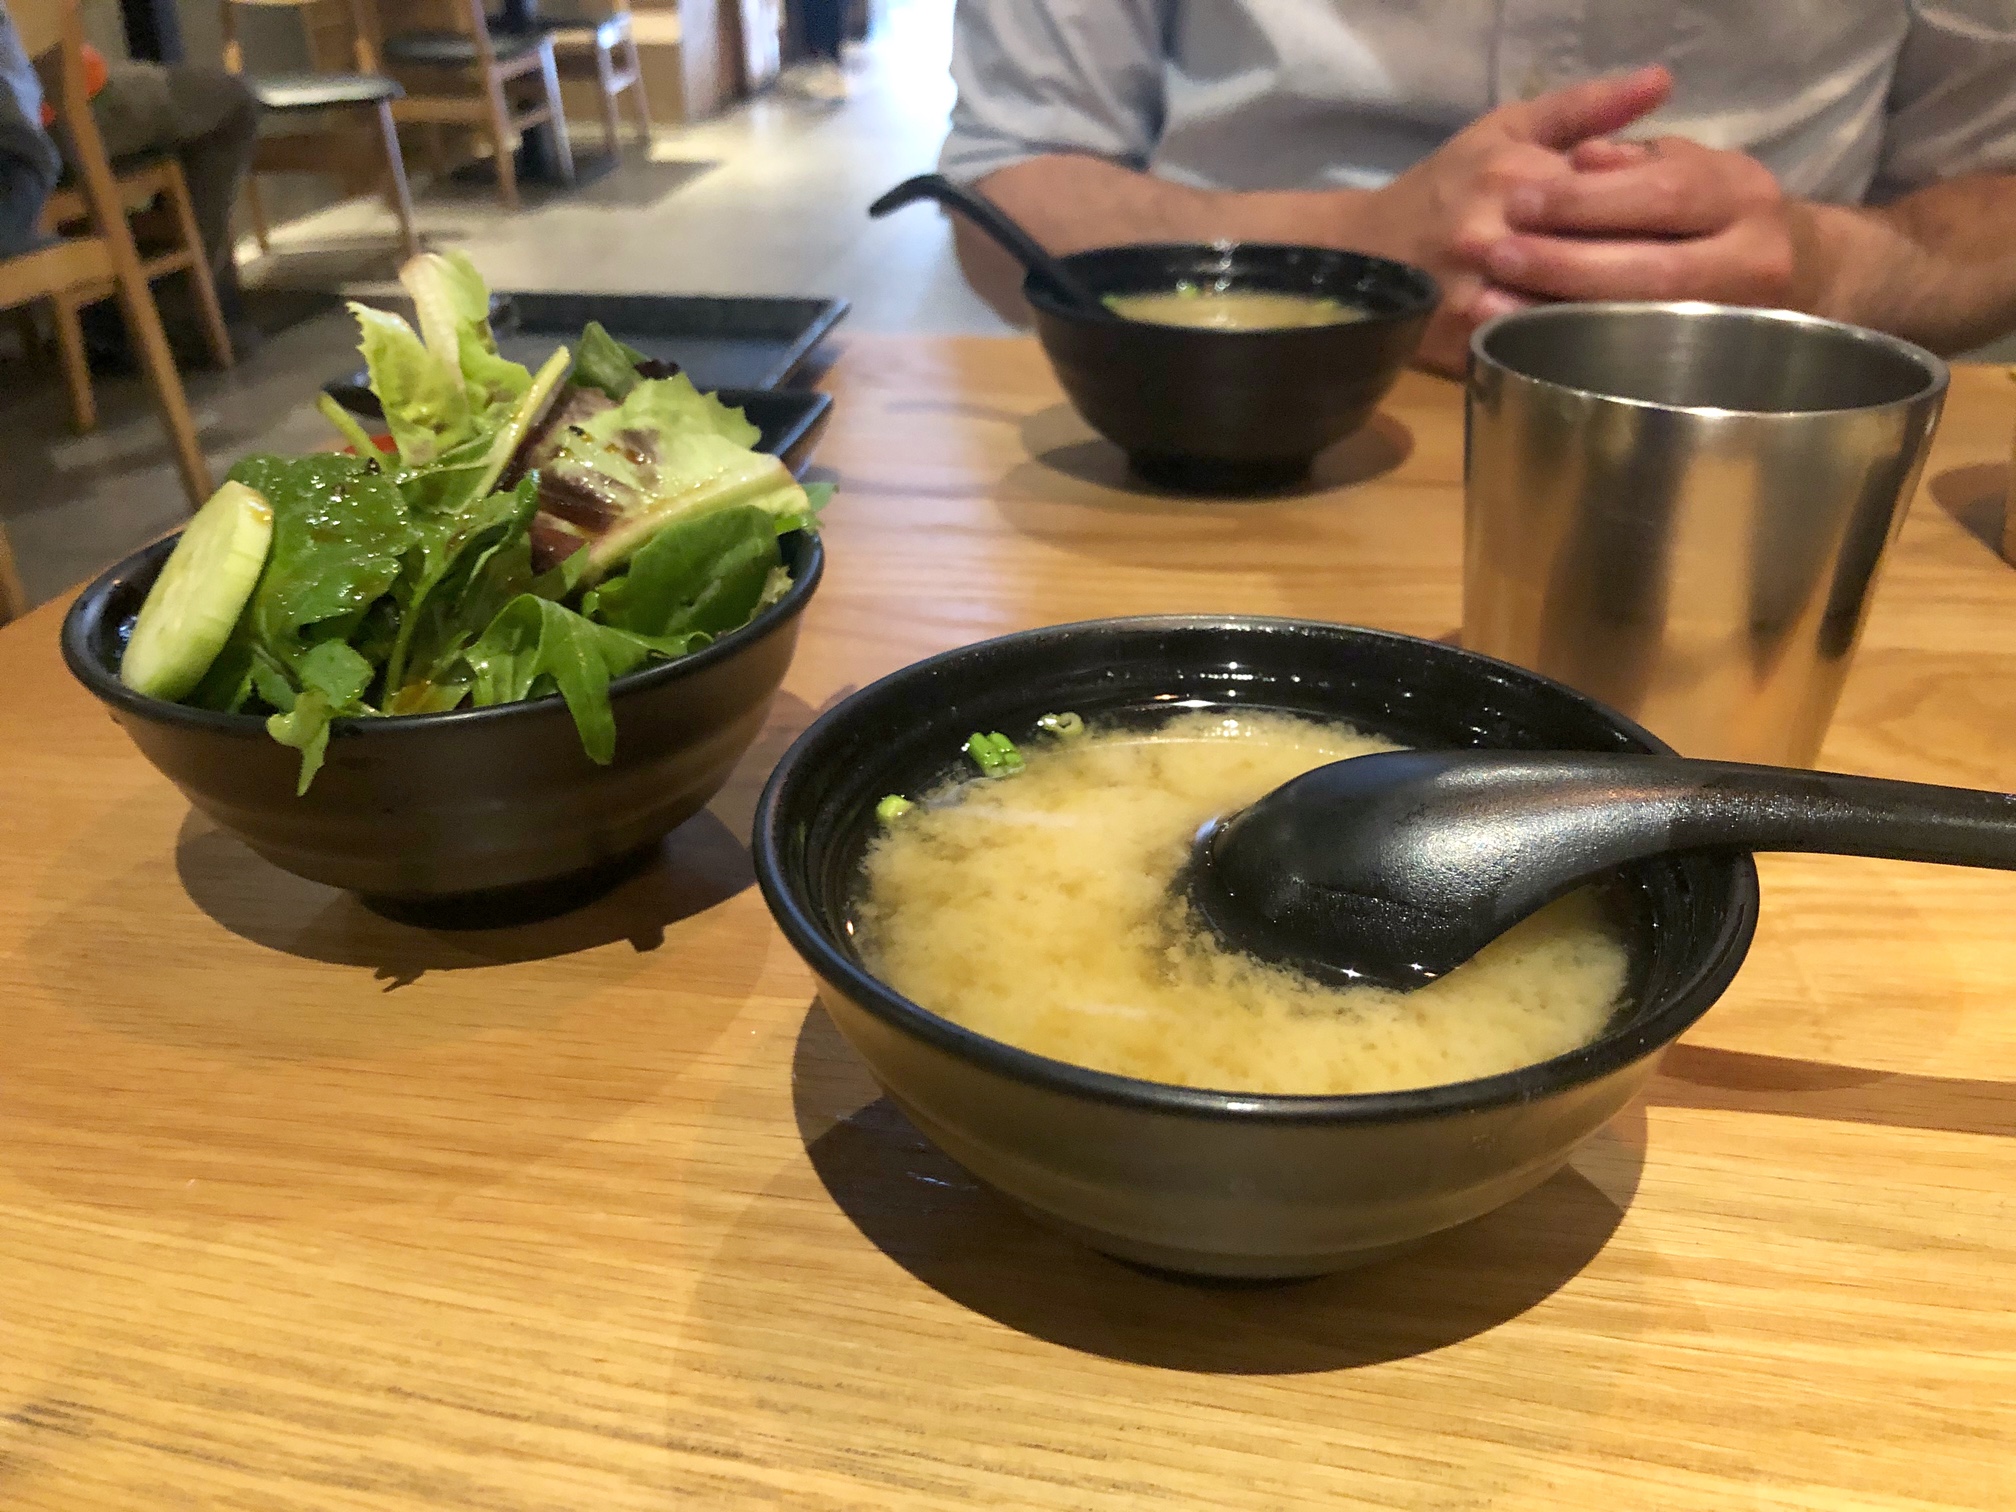 On a wooden table at Sakanaya, there is a black bowl filled with miso soup and a black spoon in front of a black bowl overflowing with salad greens. Photo by Alyssa Buckley.